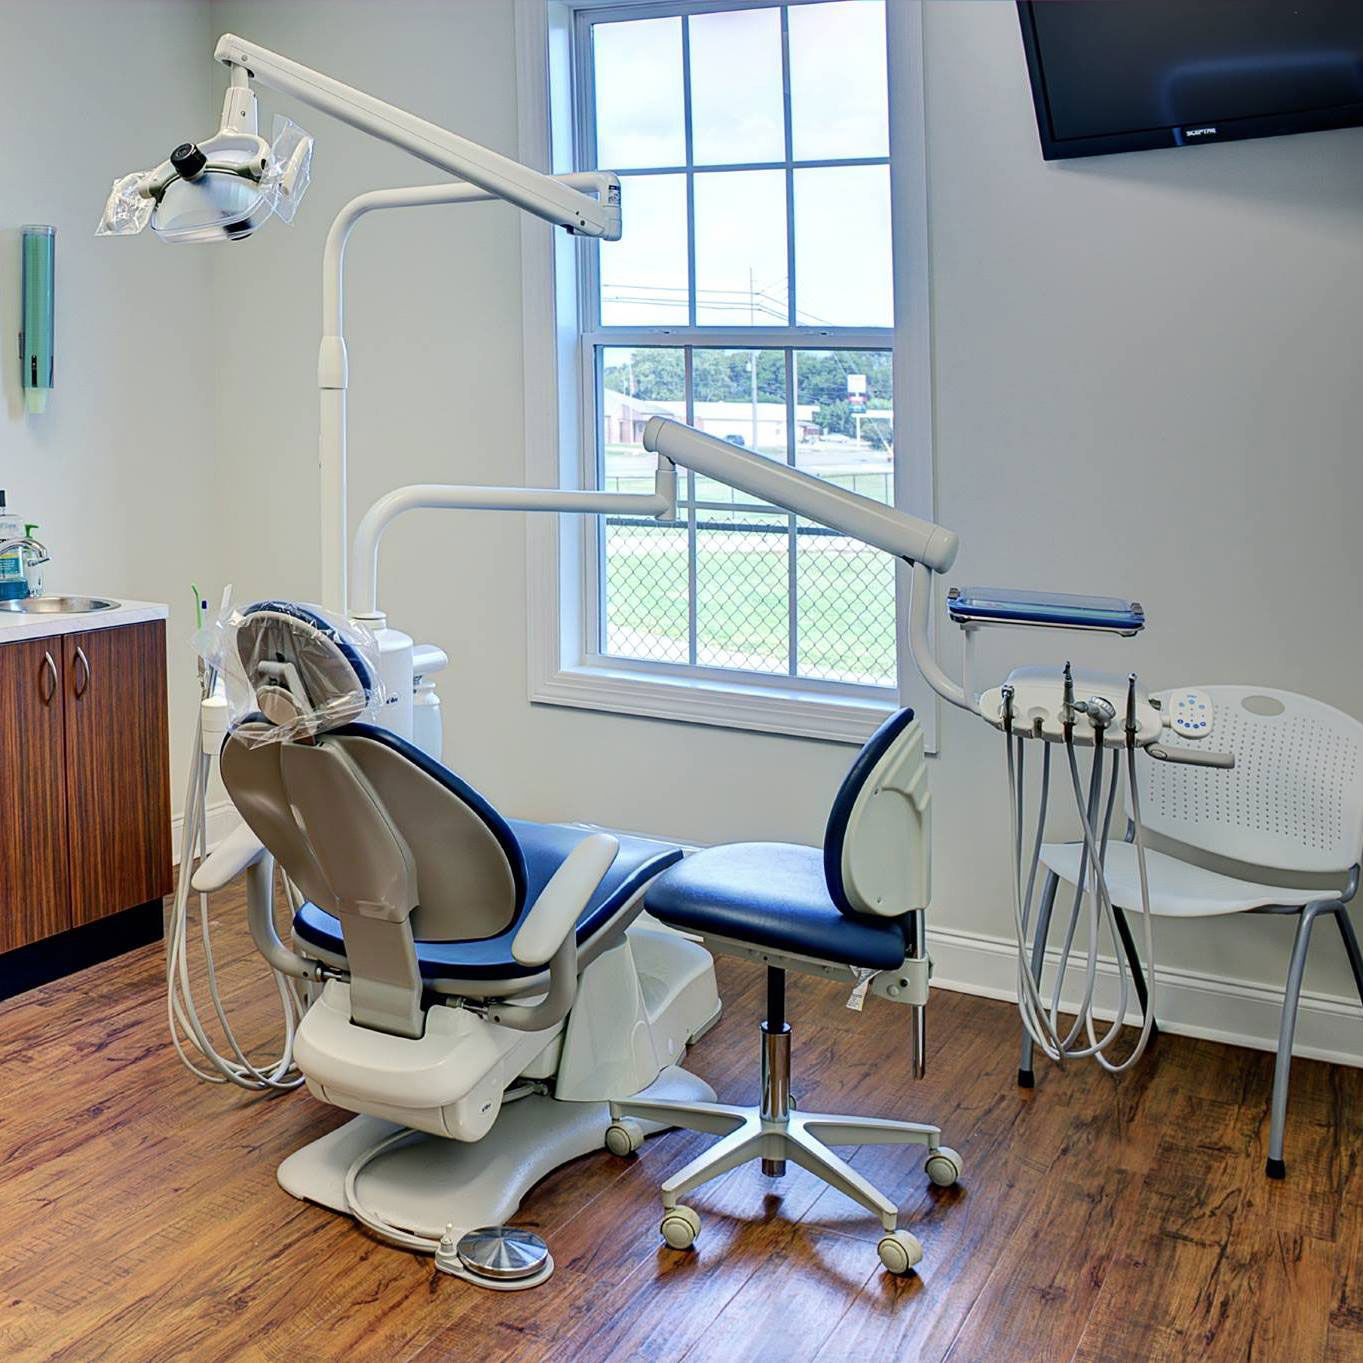 Kramer and Kramer Dental | Cosmetic Dentistry, Extractions and Oral Exams